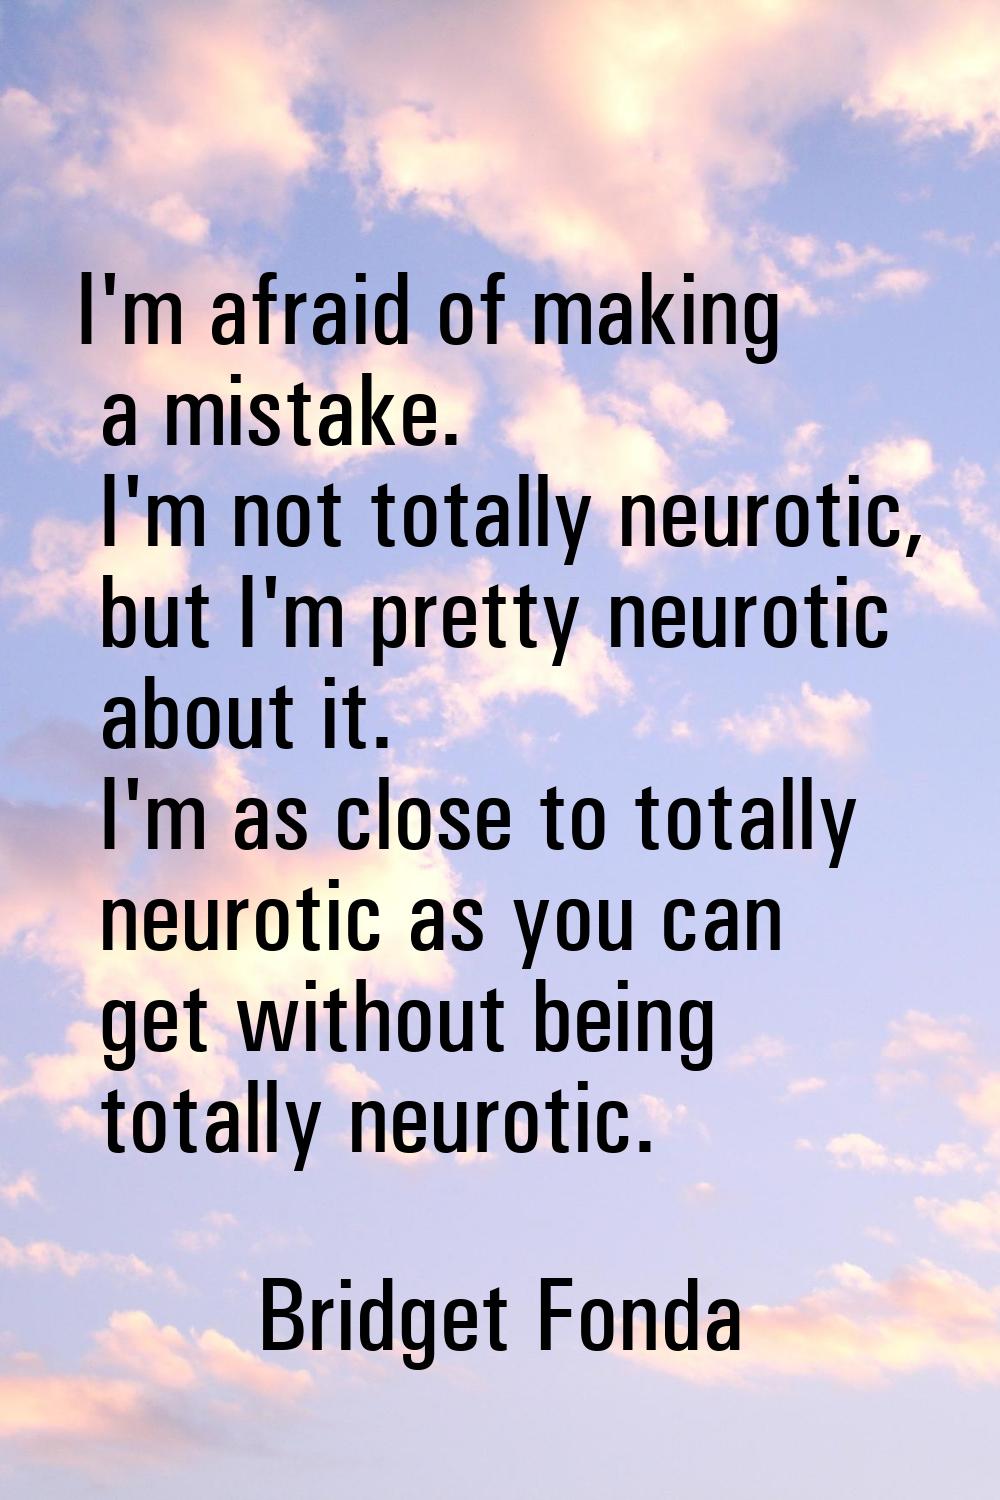 I'm afraid of making a mistake. I'm not totally neurotic, but I'm pretty neurotic about it. I'm as 